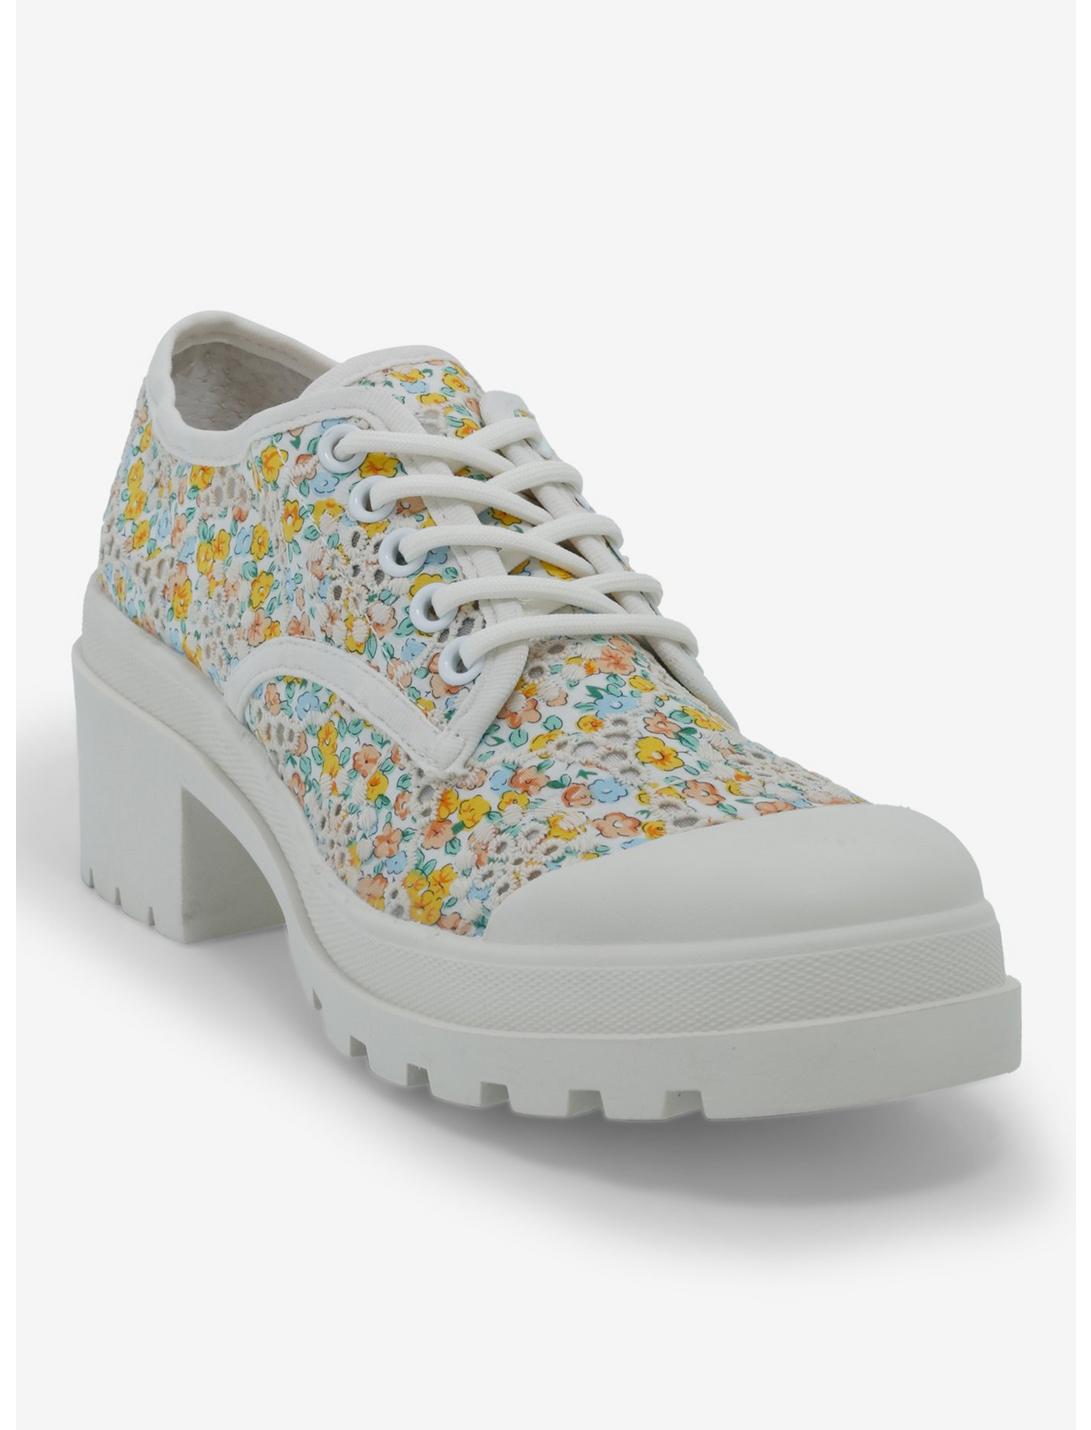 Chinese Laundry Floral Heeled Sneakers, MULTI, hi-res